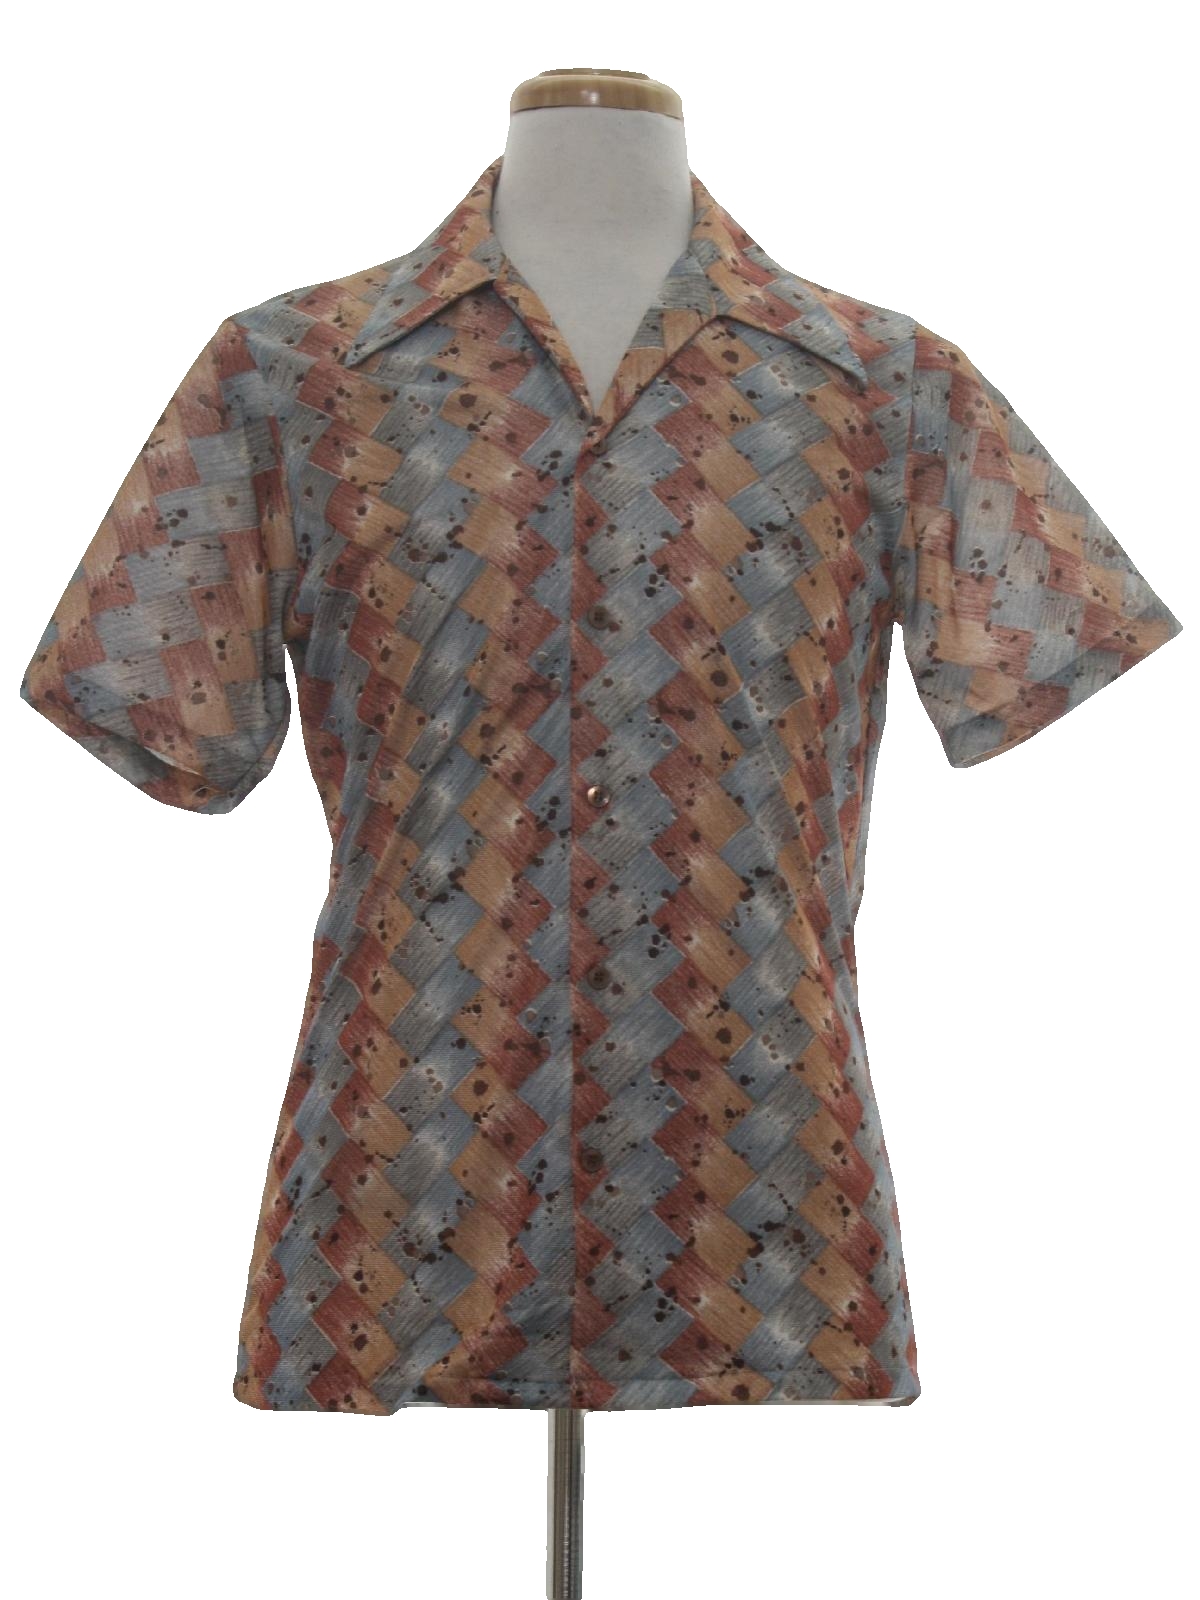 Retro 1970's Print Disco Shirt (JCPenney) : 70s -JCPenney- Mens silky ...